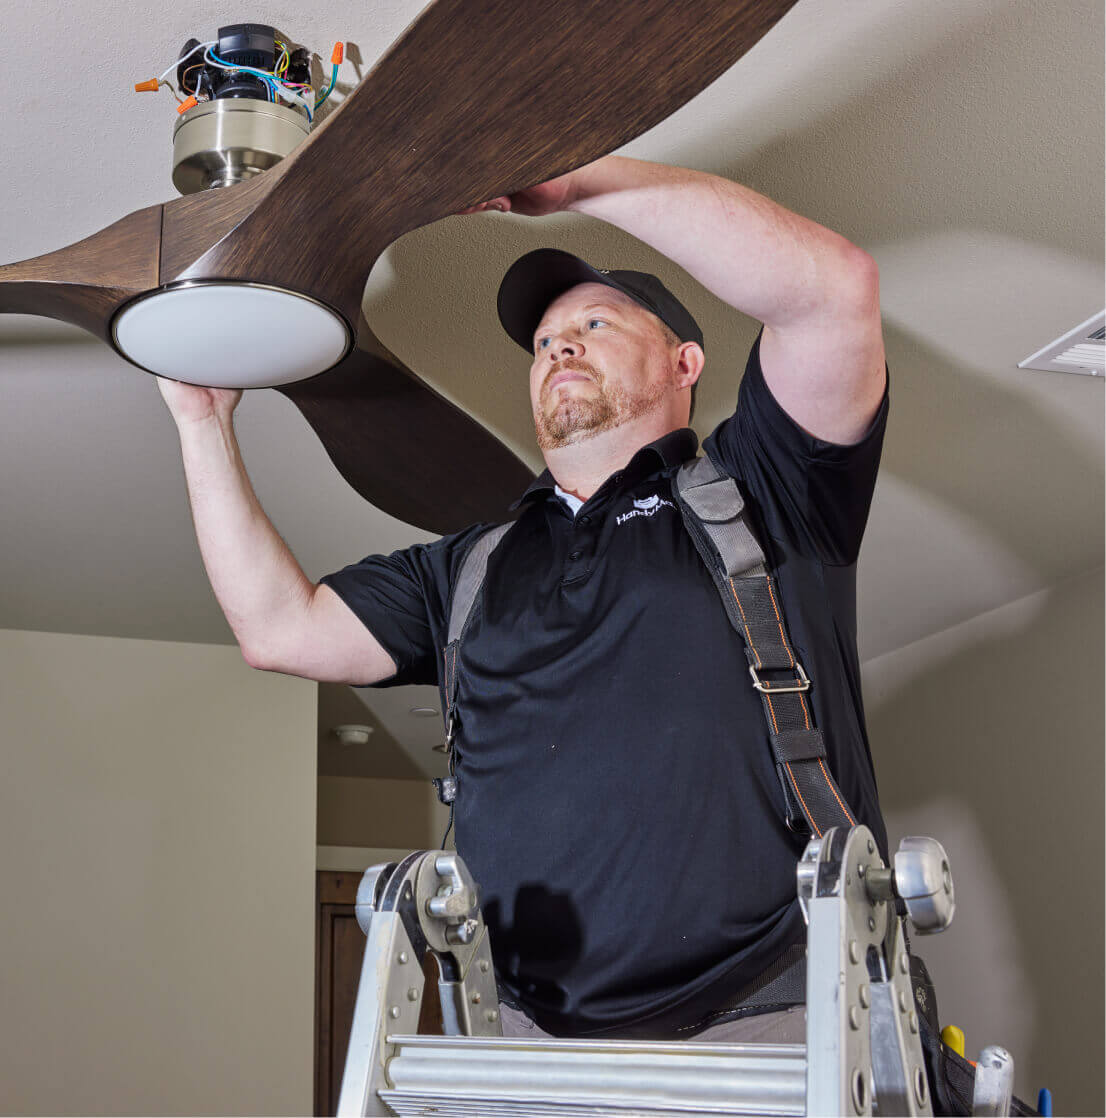 Tailored, easy and affordable insurance for handyman business in North Carolina